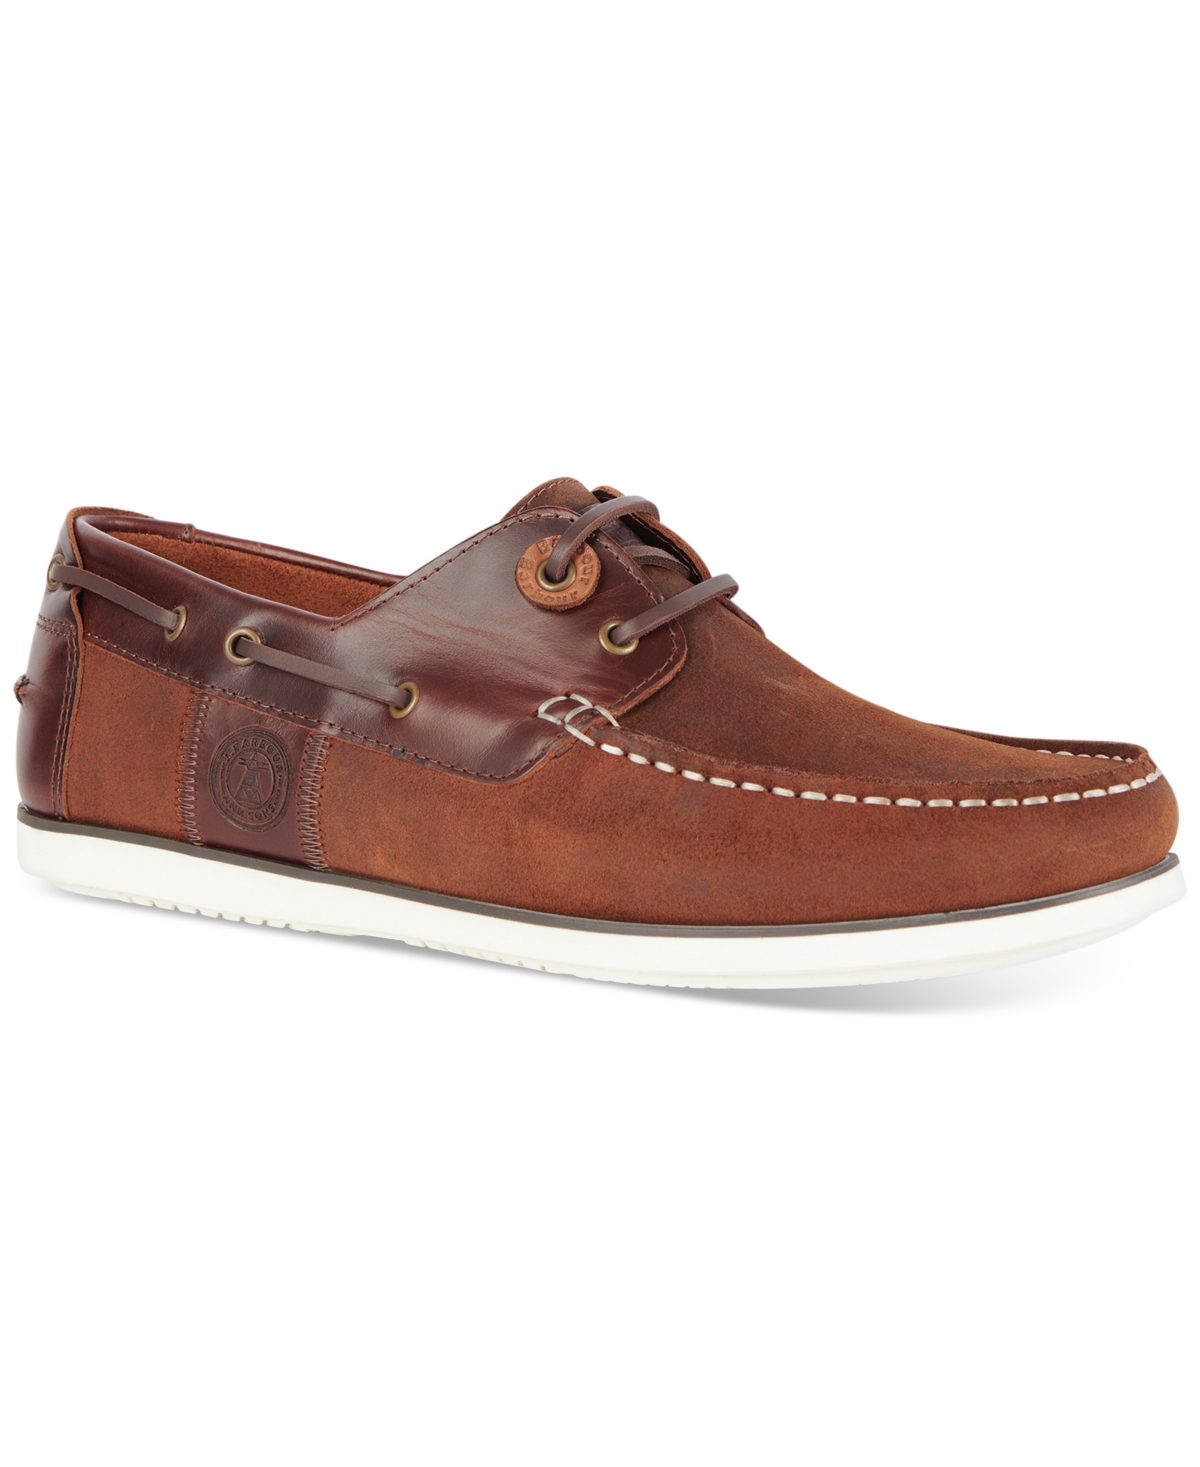 BARBOUR MEN'S LEATHER & SUEDE WAKE 2-EYE BOAT SHOES